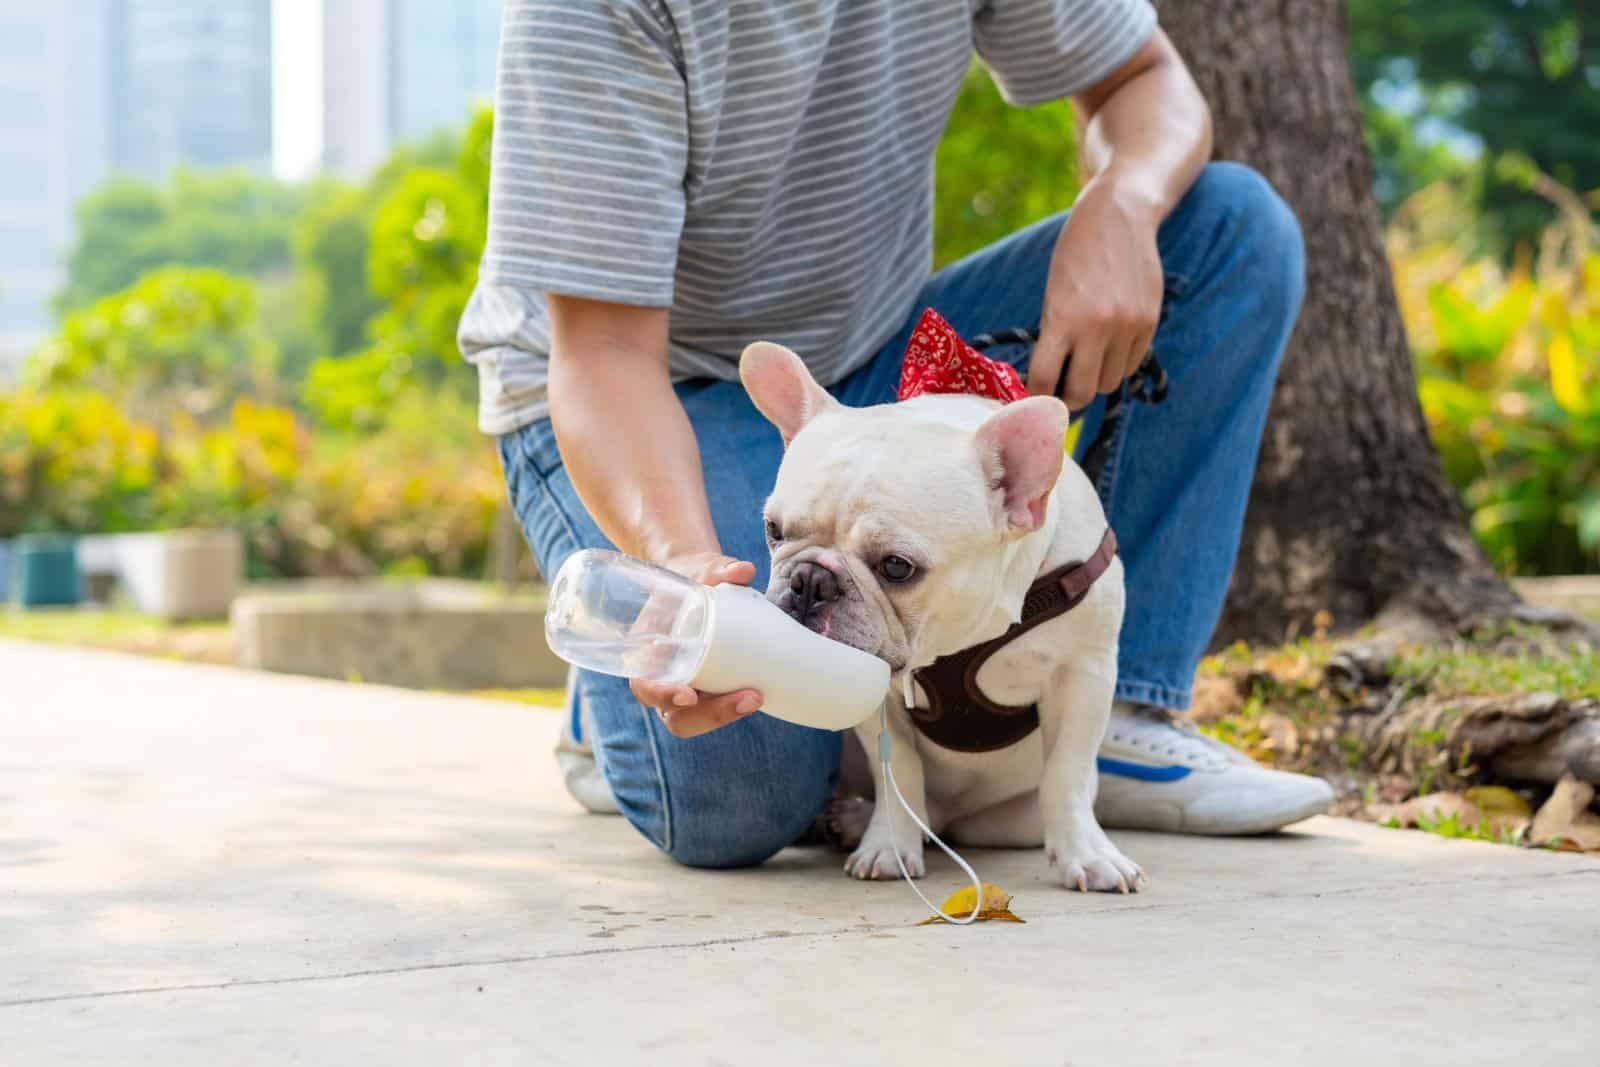 <p class="wp-caption-text">Image Credit: Shutterstock / CandyRetriever</p>  <p><span>Hydration is key, especially on long trips. Remember, a hydrated pet is a happy pet.</span></p>